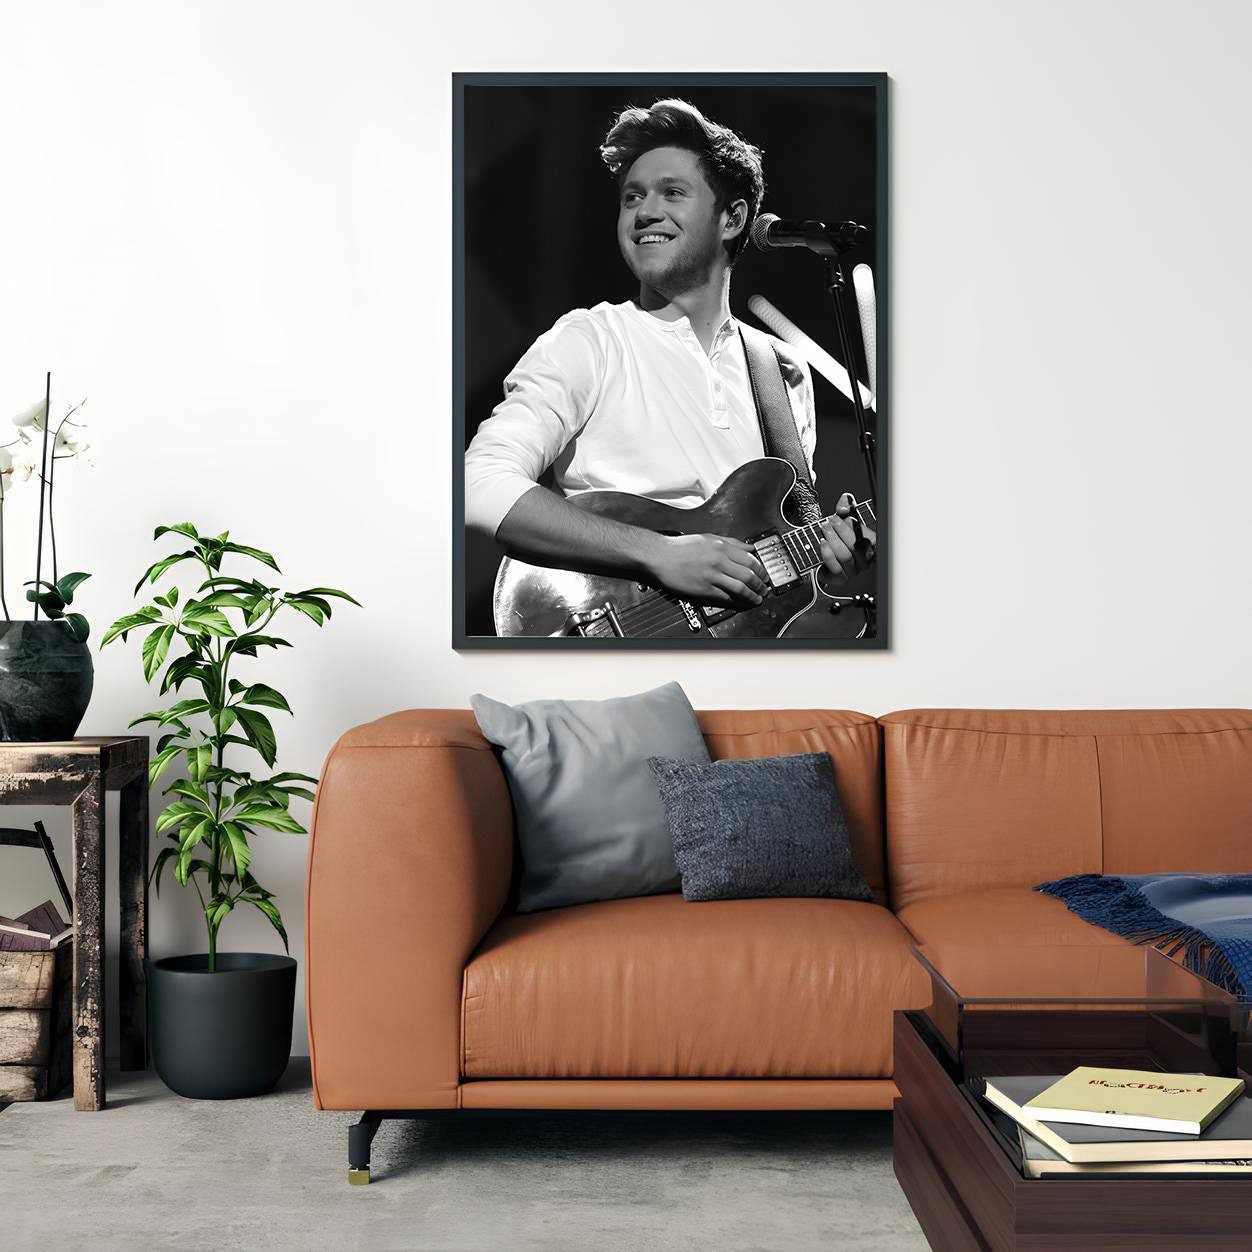 Niall Horan Concert Poster, Vintage Music Poster